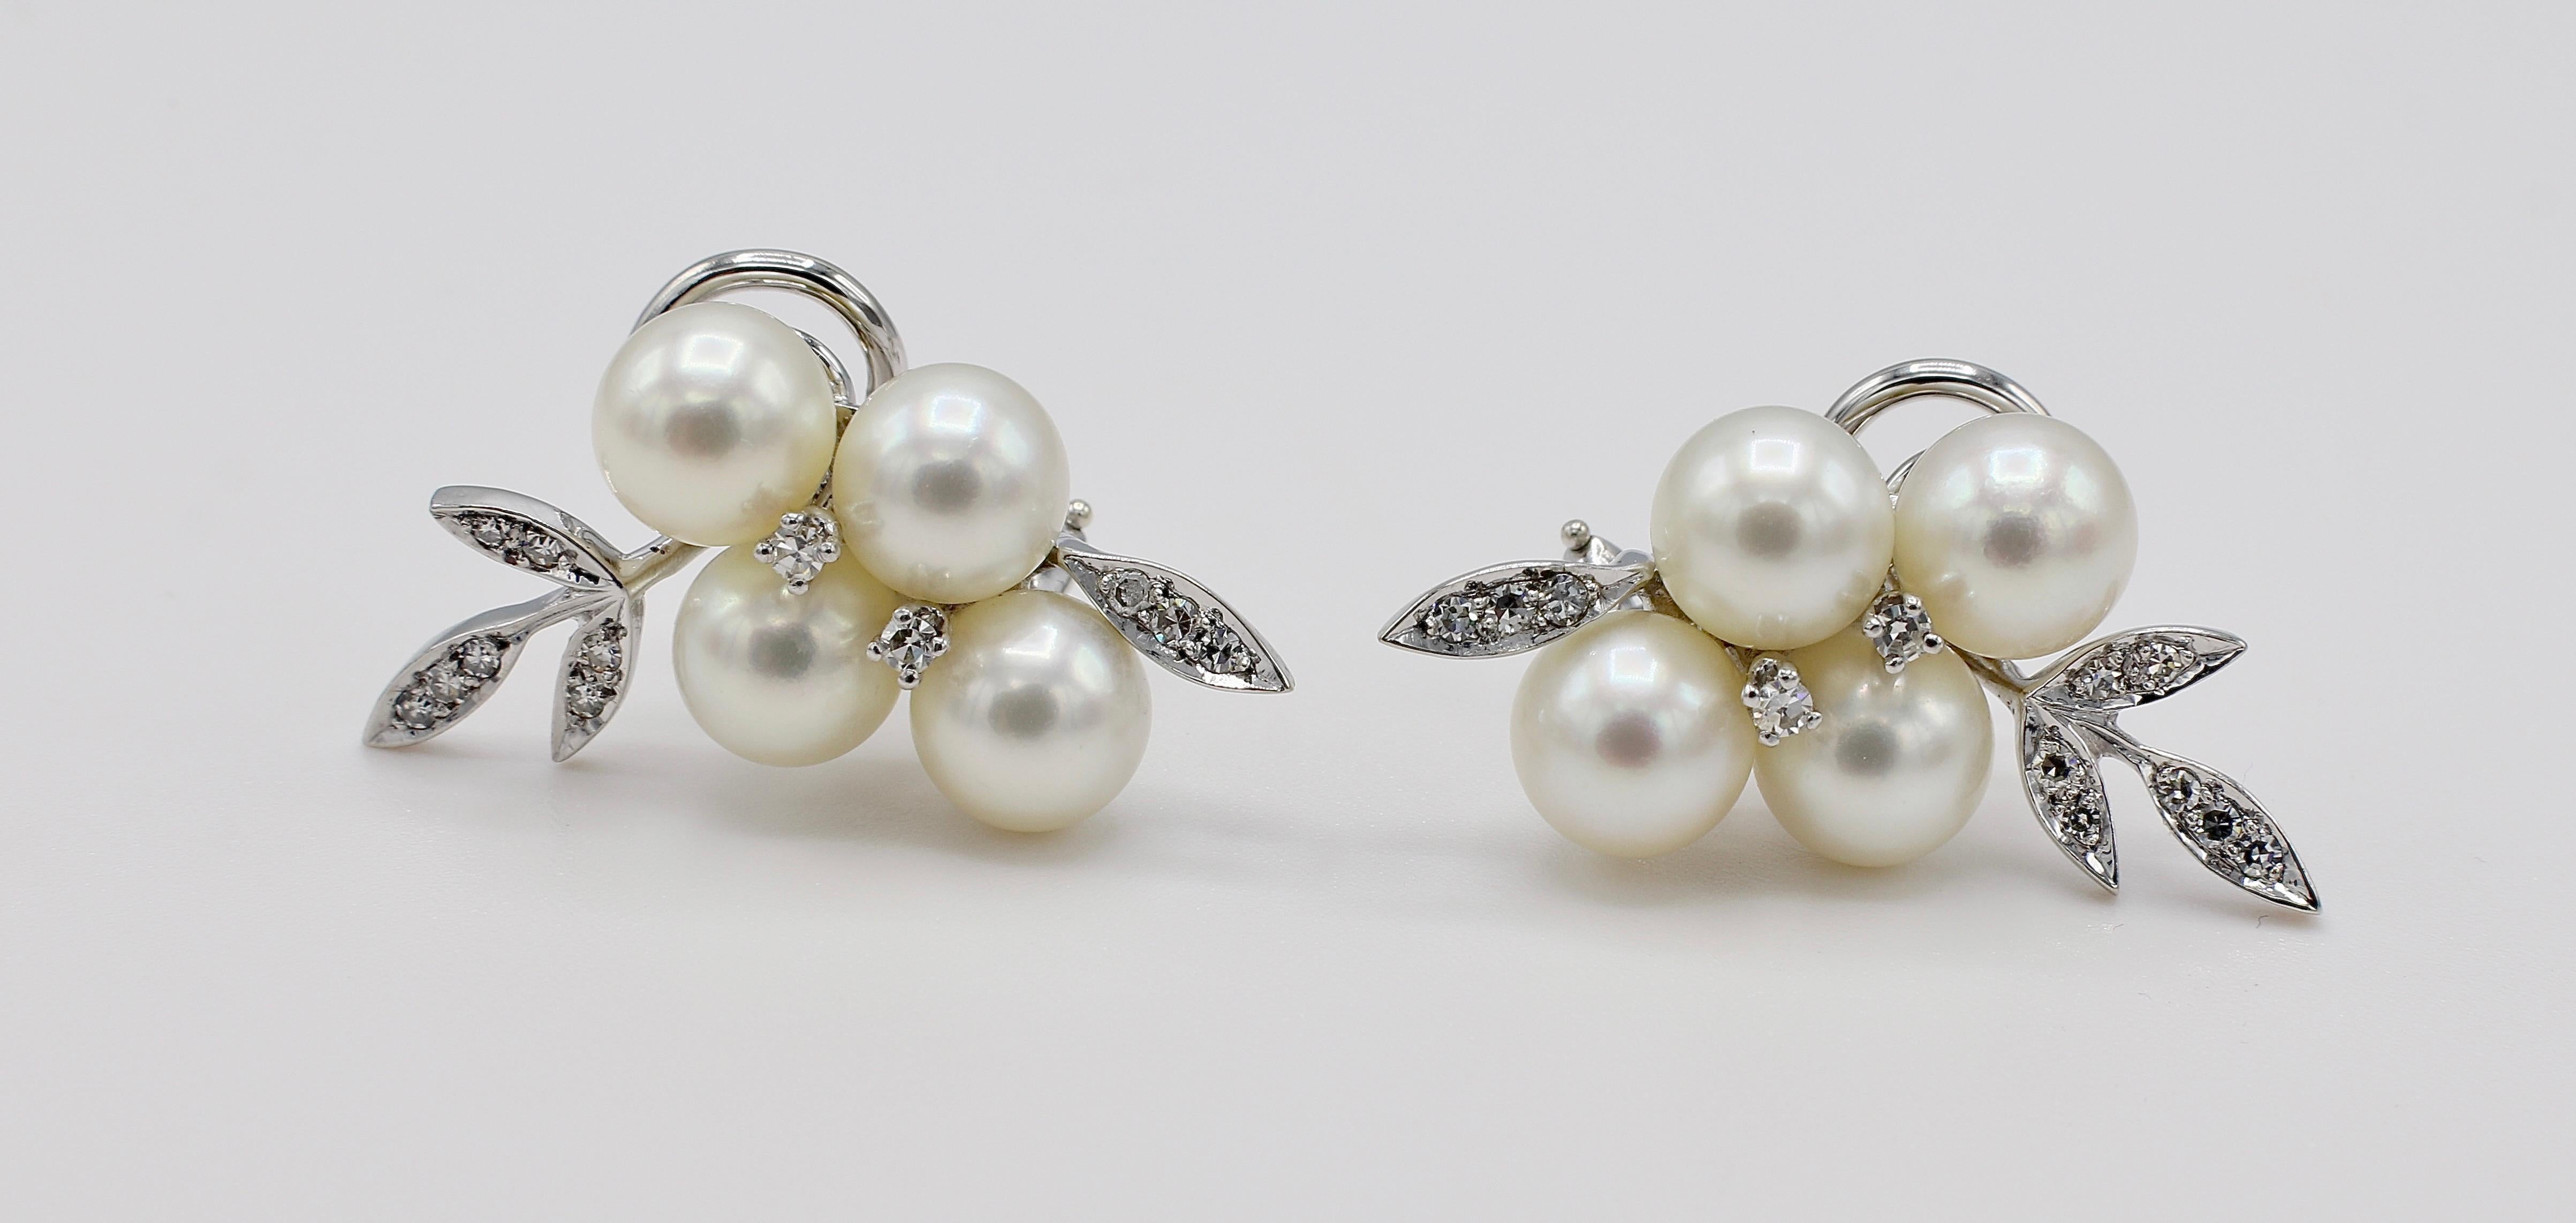 14 Karat White Gold Diamond & Pearl Cluster Leaf Earrings 
Metal: 14k white gold
Weight: 9.45 grams
Diamonds: 24 single cut diamonds, approx. .30 CTW G VS
Pearls: 7mm white color with a creamy luster 
Length: 29mm
Width: 15mm
